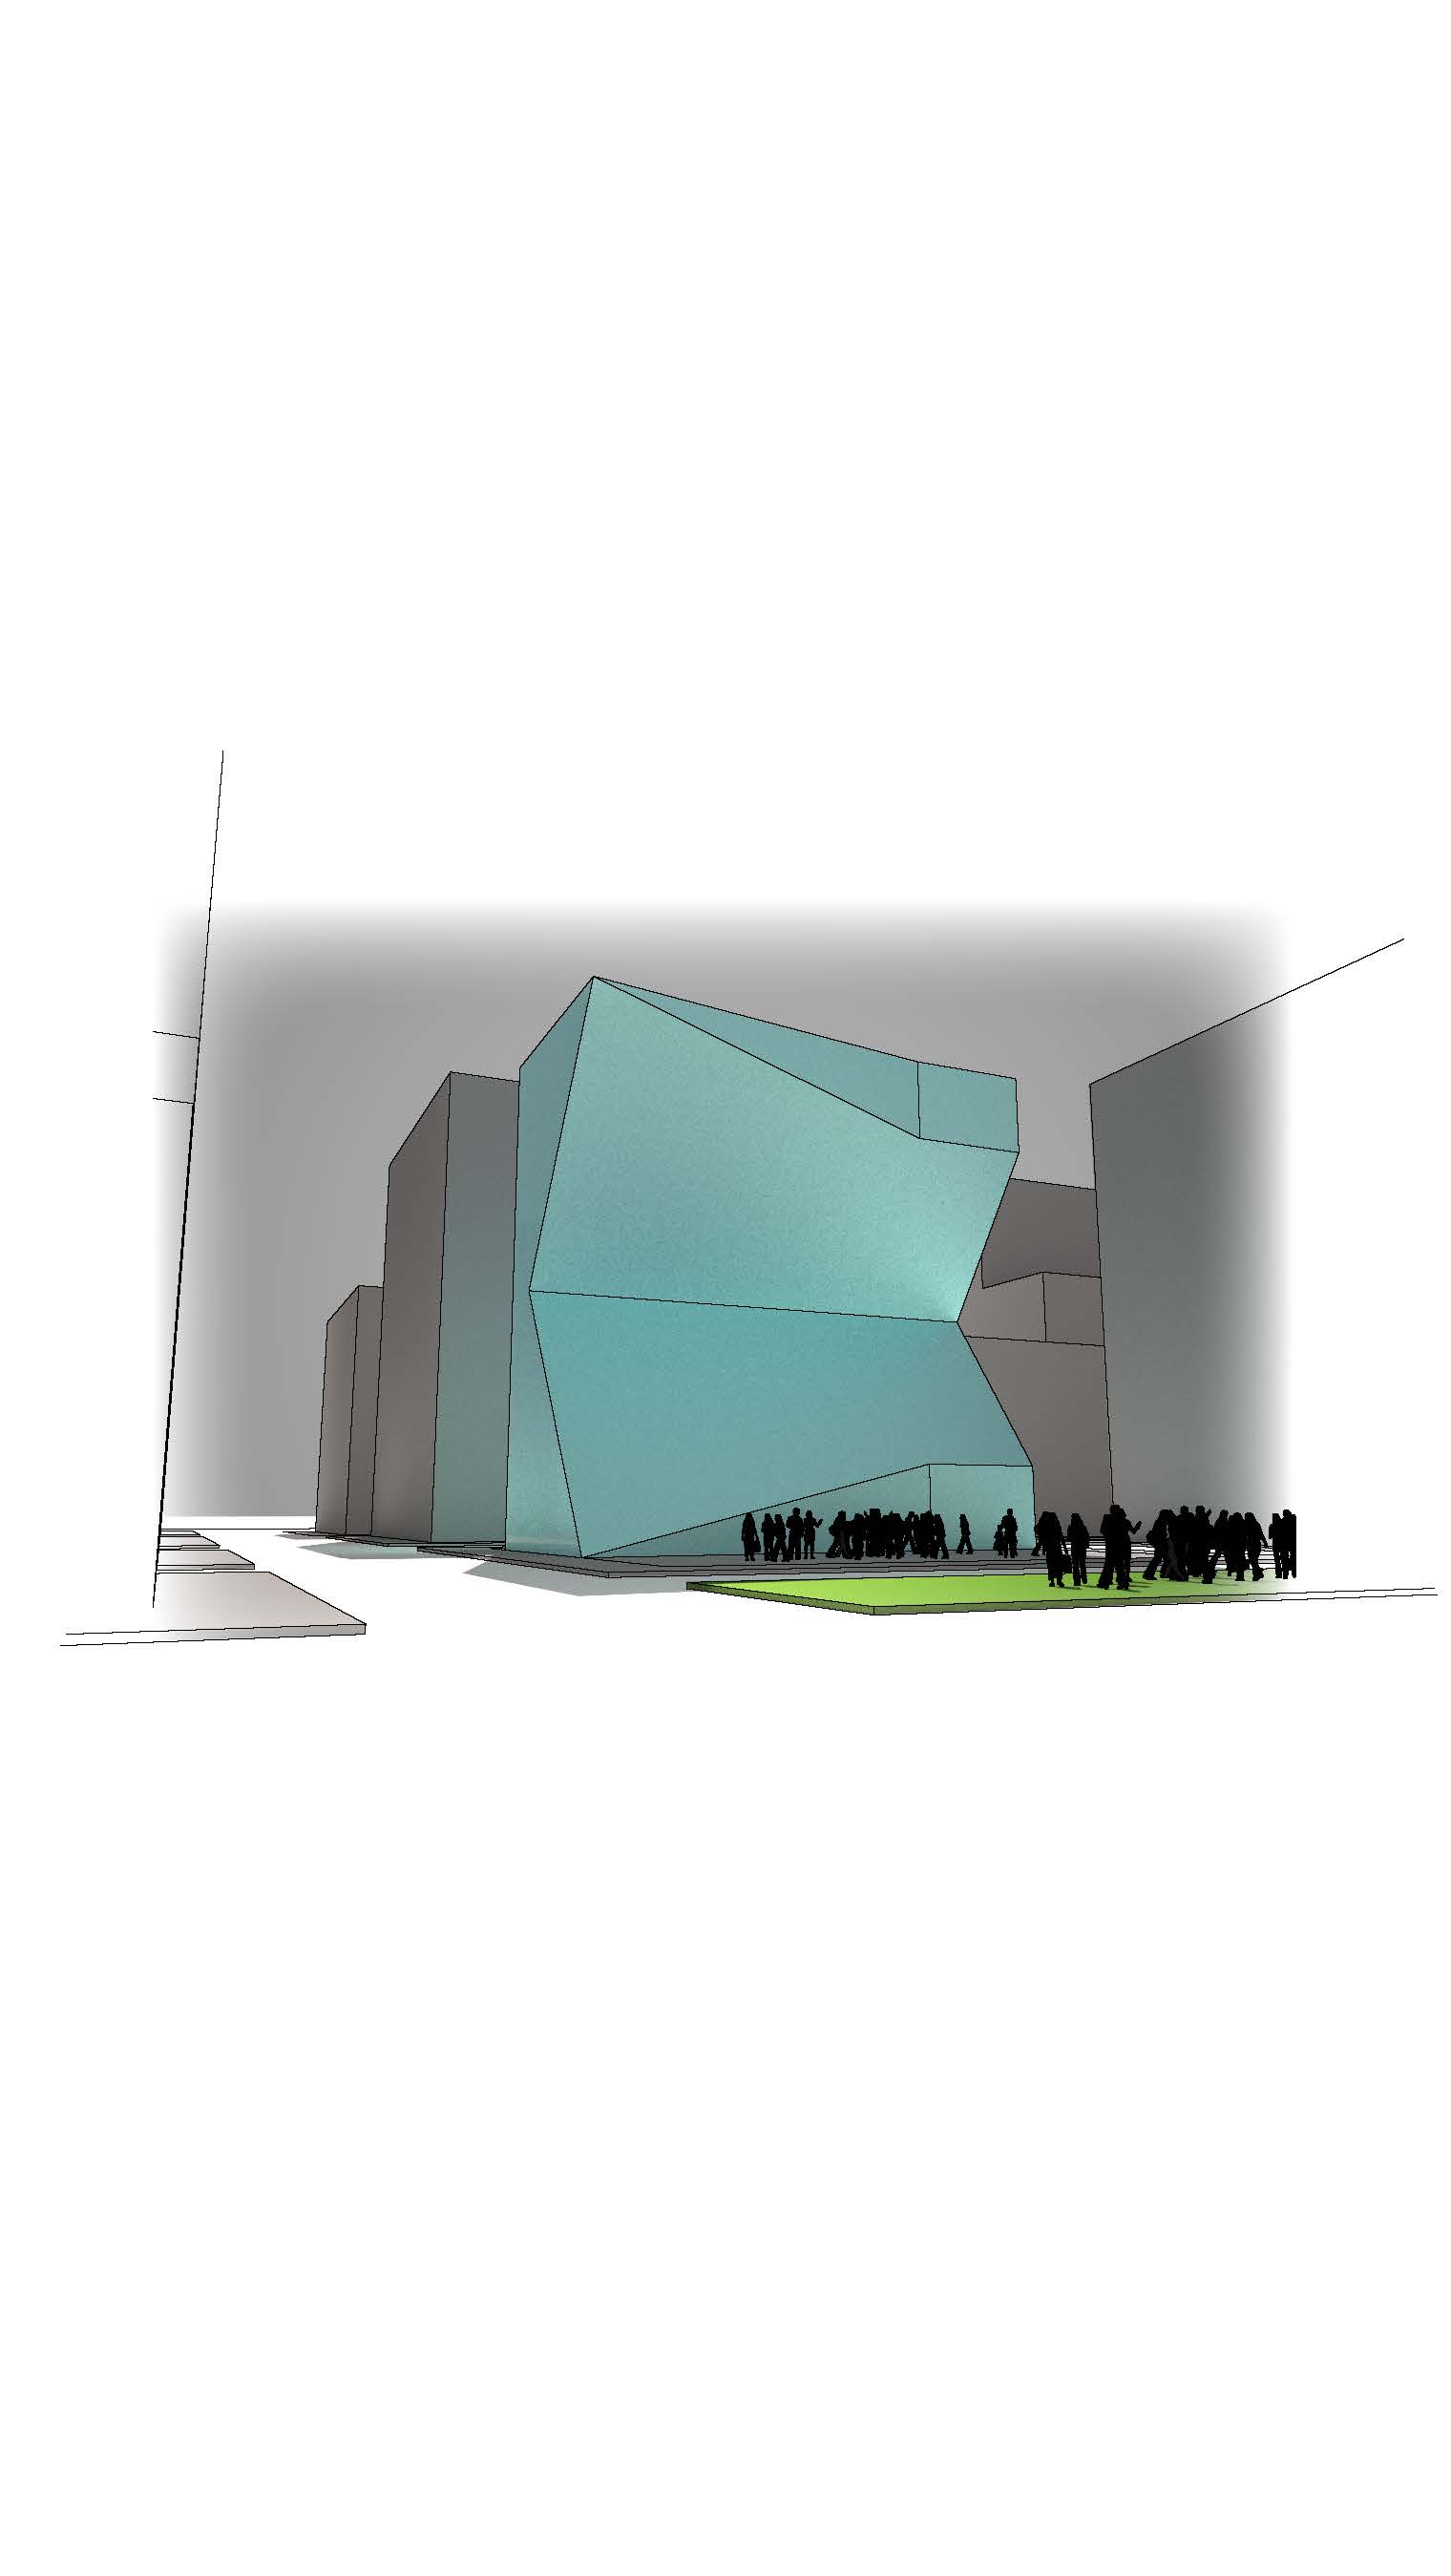 Rendered projection of mass || Sketchup, Maxwell, Illustrator